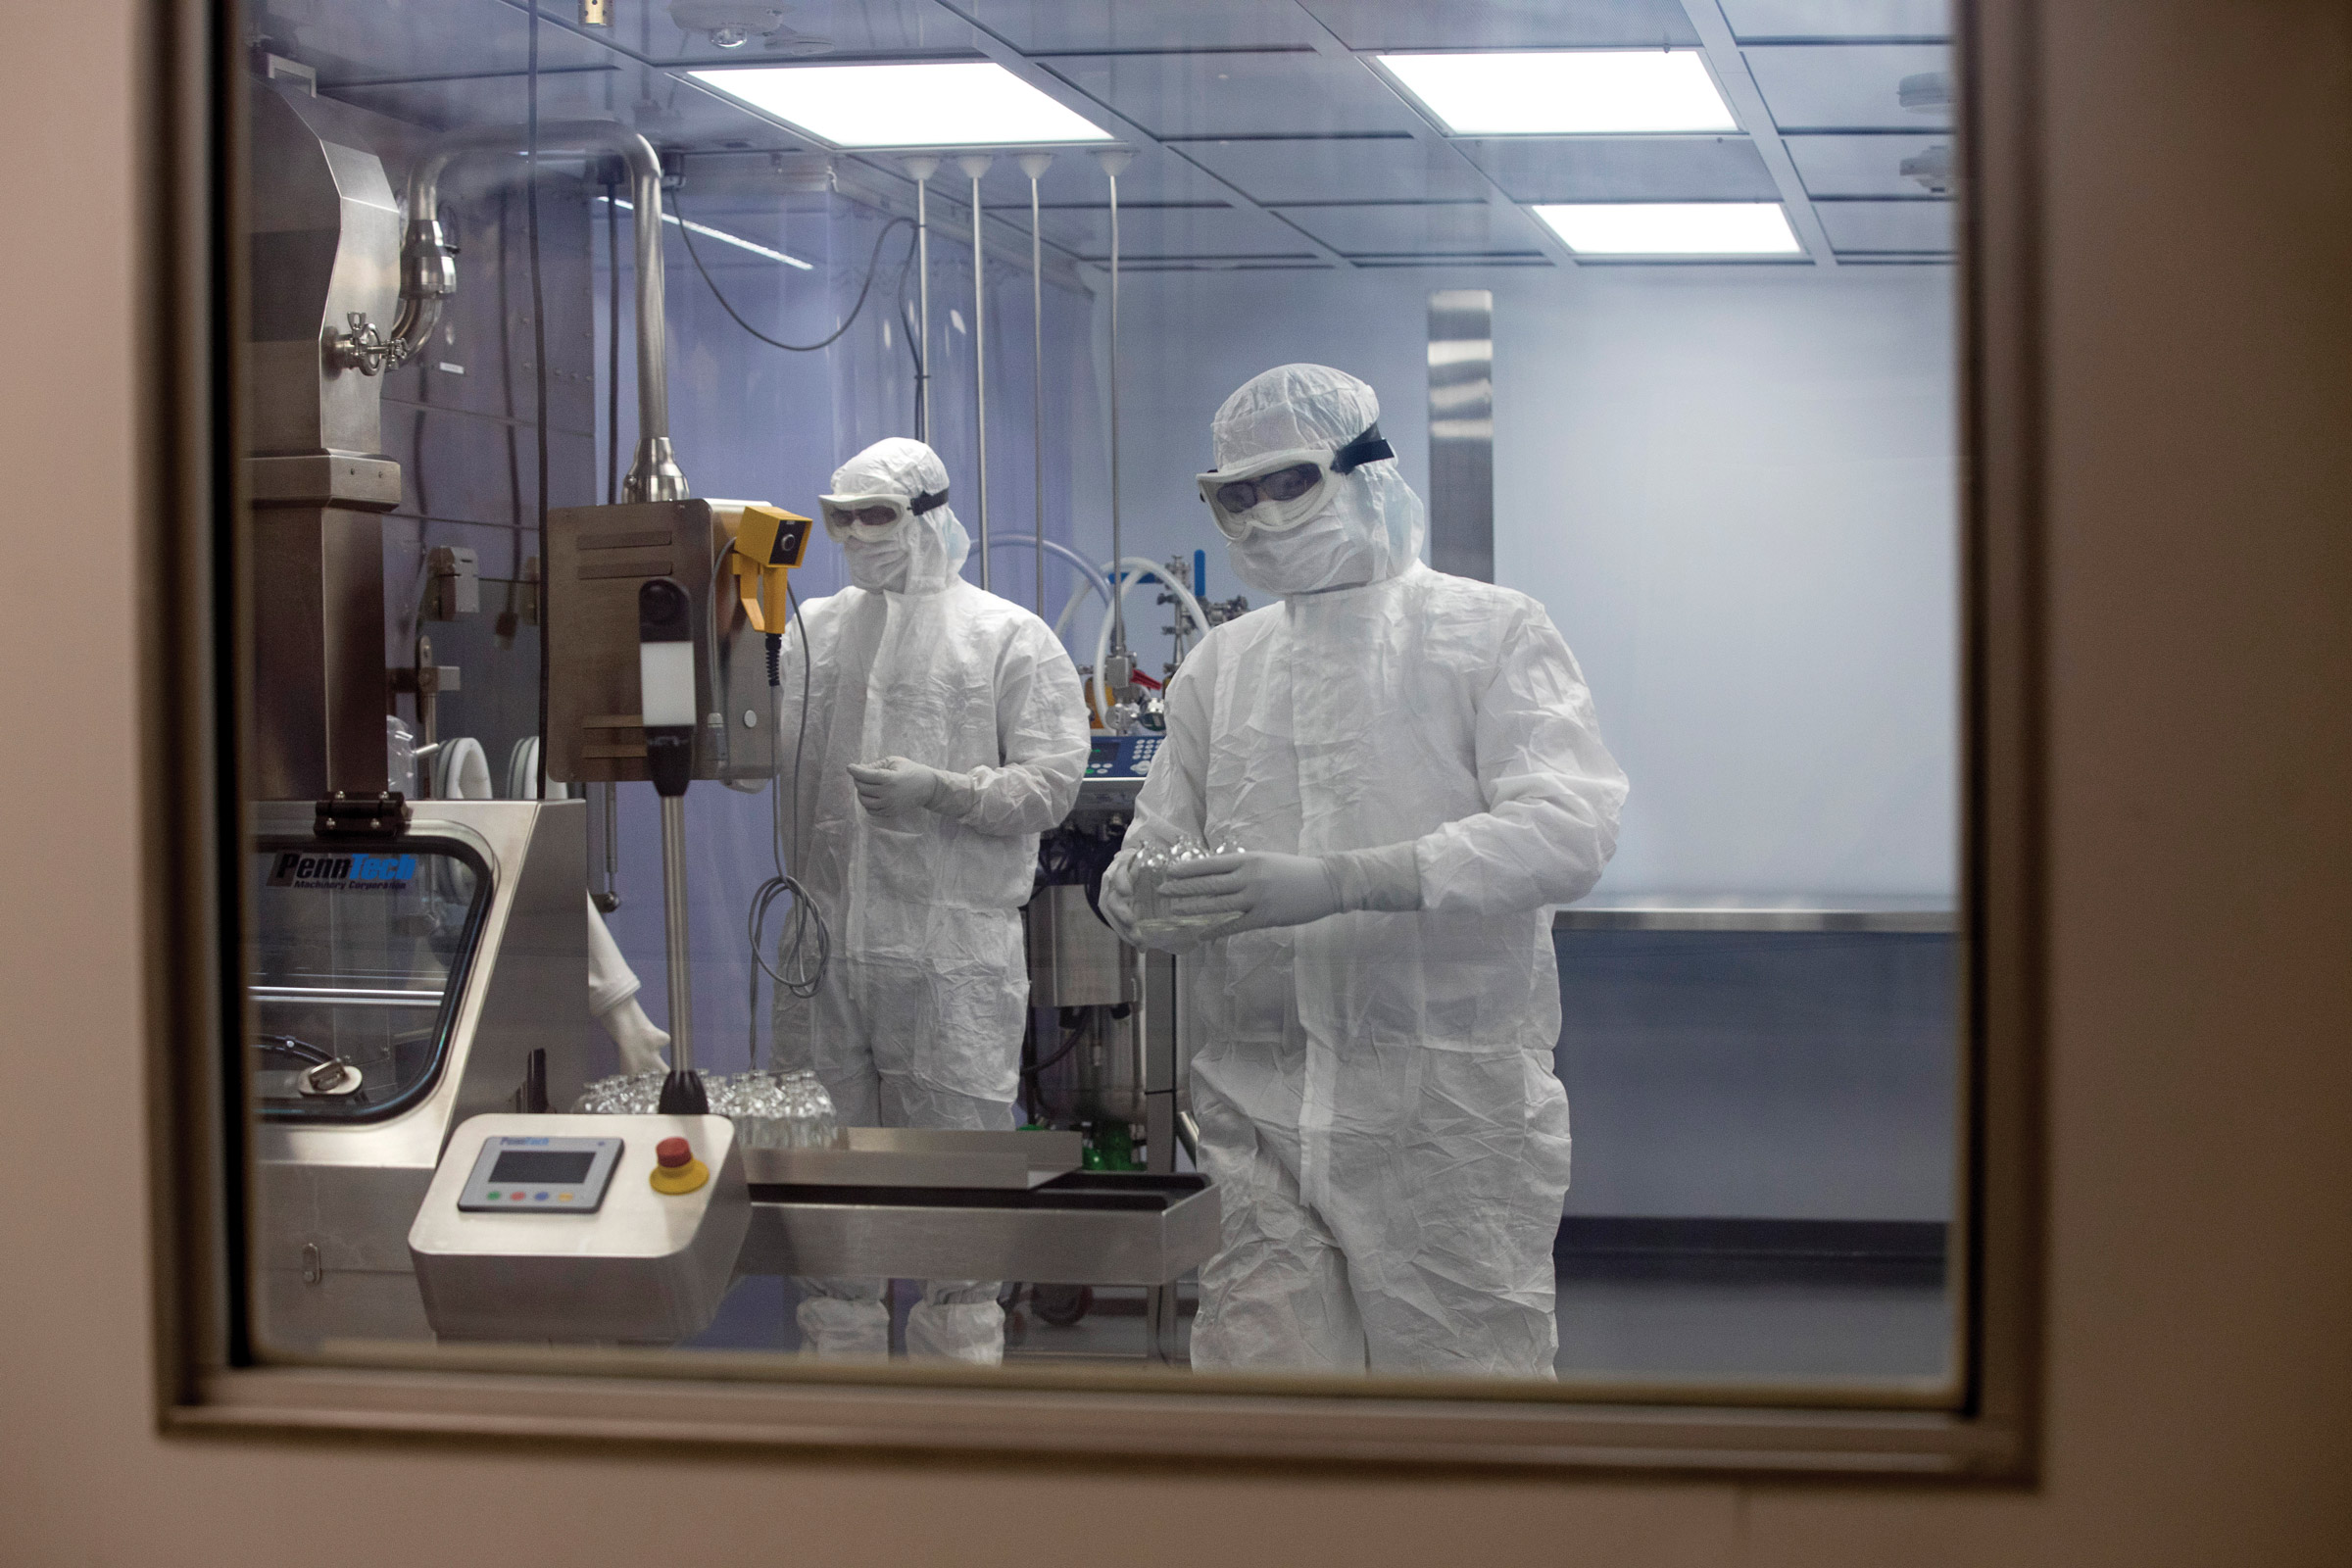 Two technicians in a cleanroom wearing protective gear